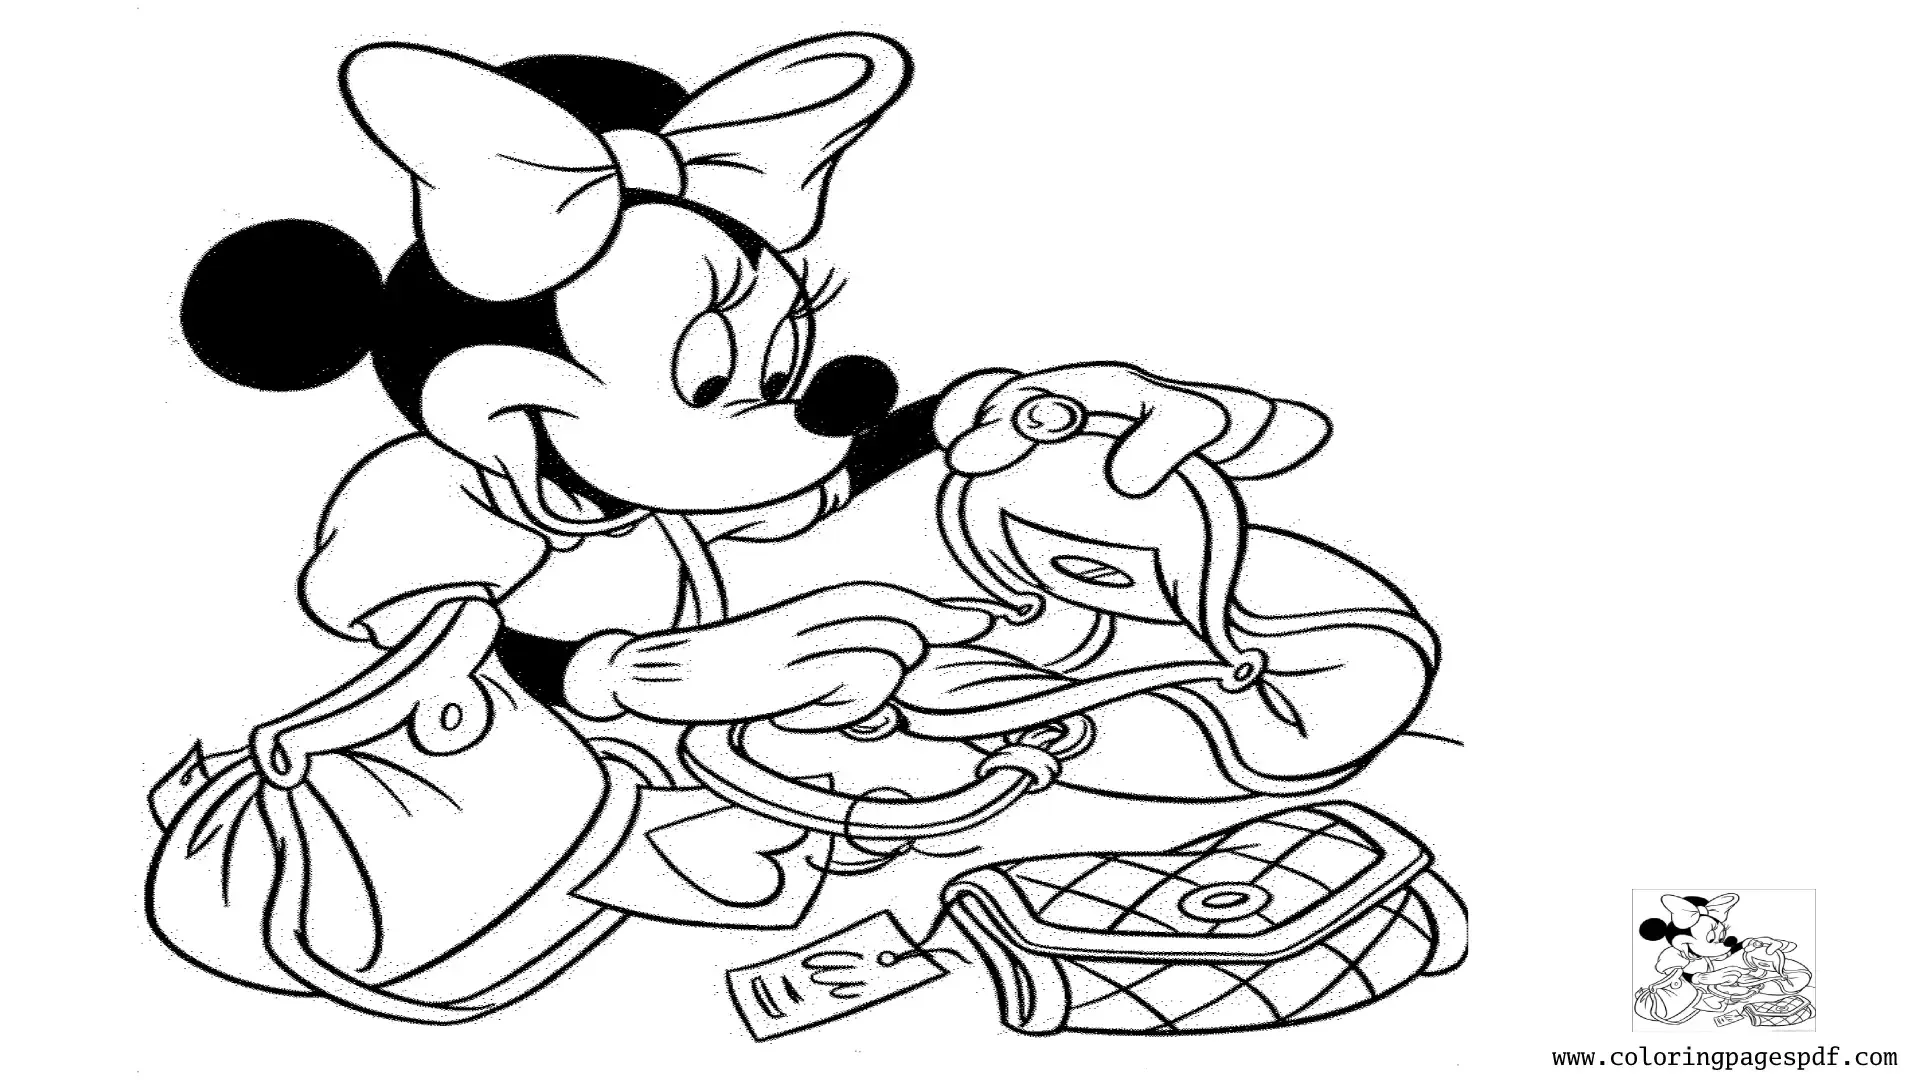 Coloring Pages Of Minnie Mouse Buying A Purse